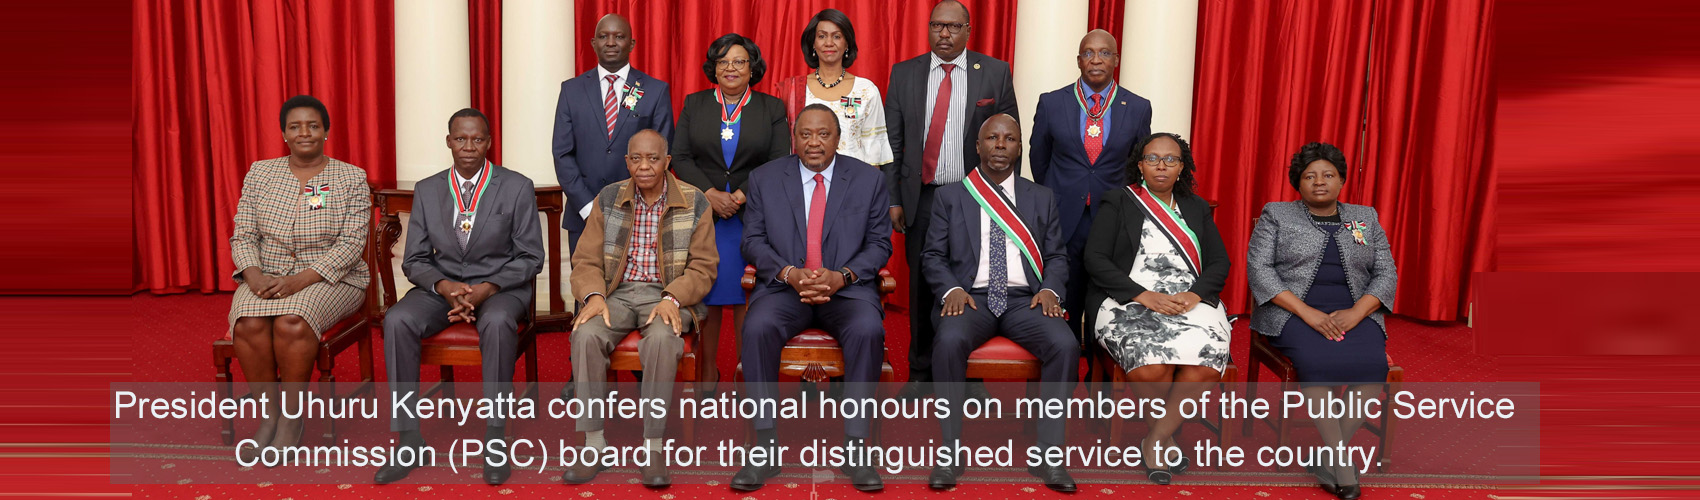  President Uhuru Kenyatta confers national honours on members of the Public Service Commission (PSC) board for their distinguished service to the country.